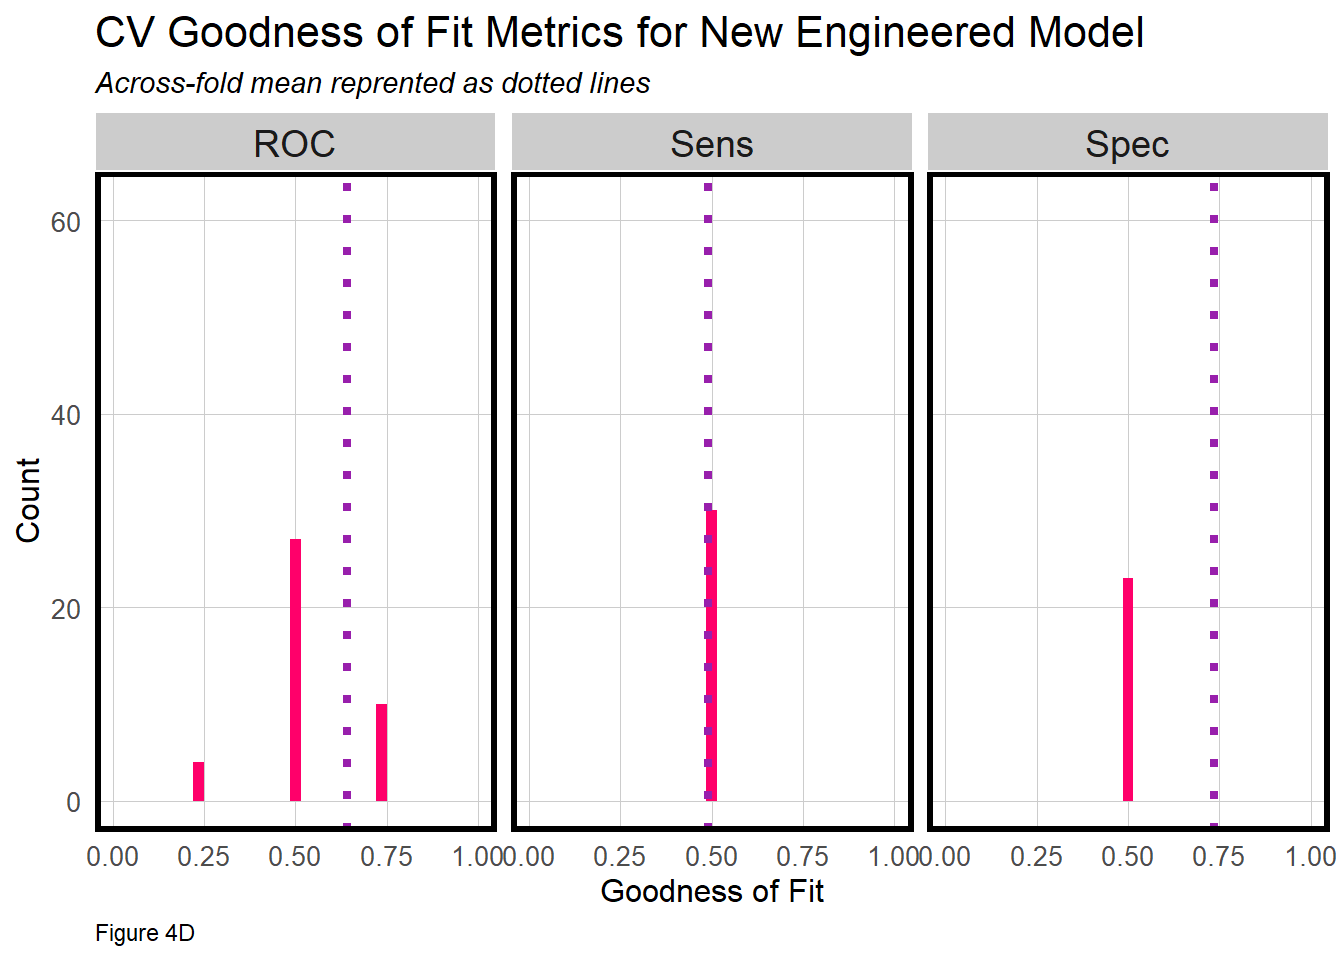 Goodness of fit metrics for the project